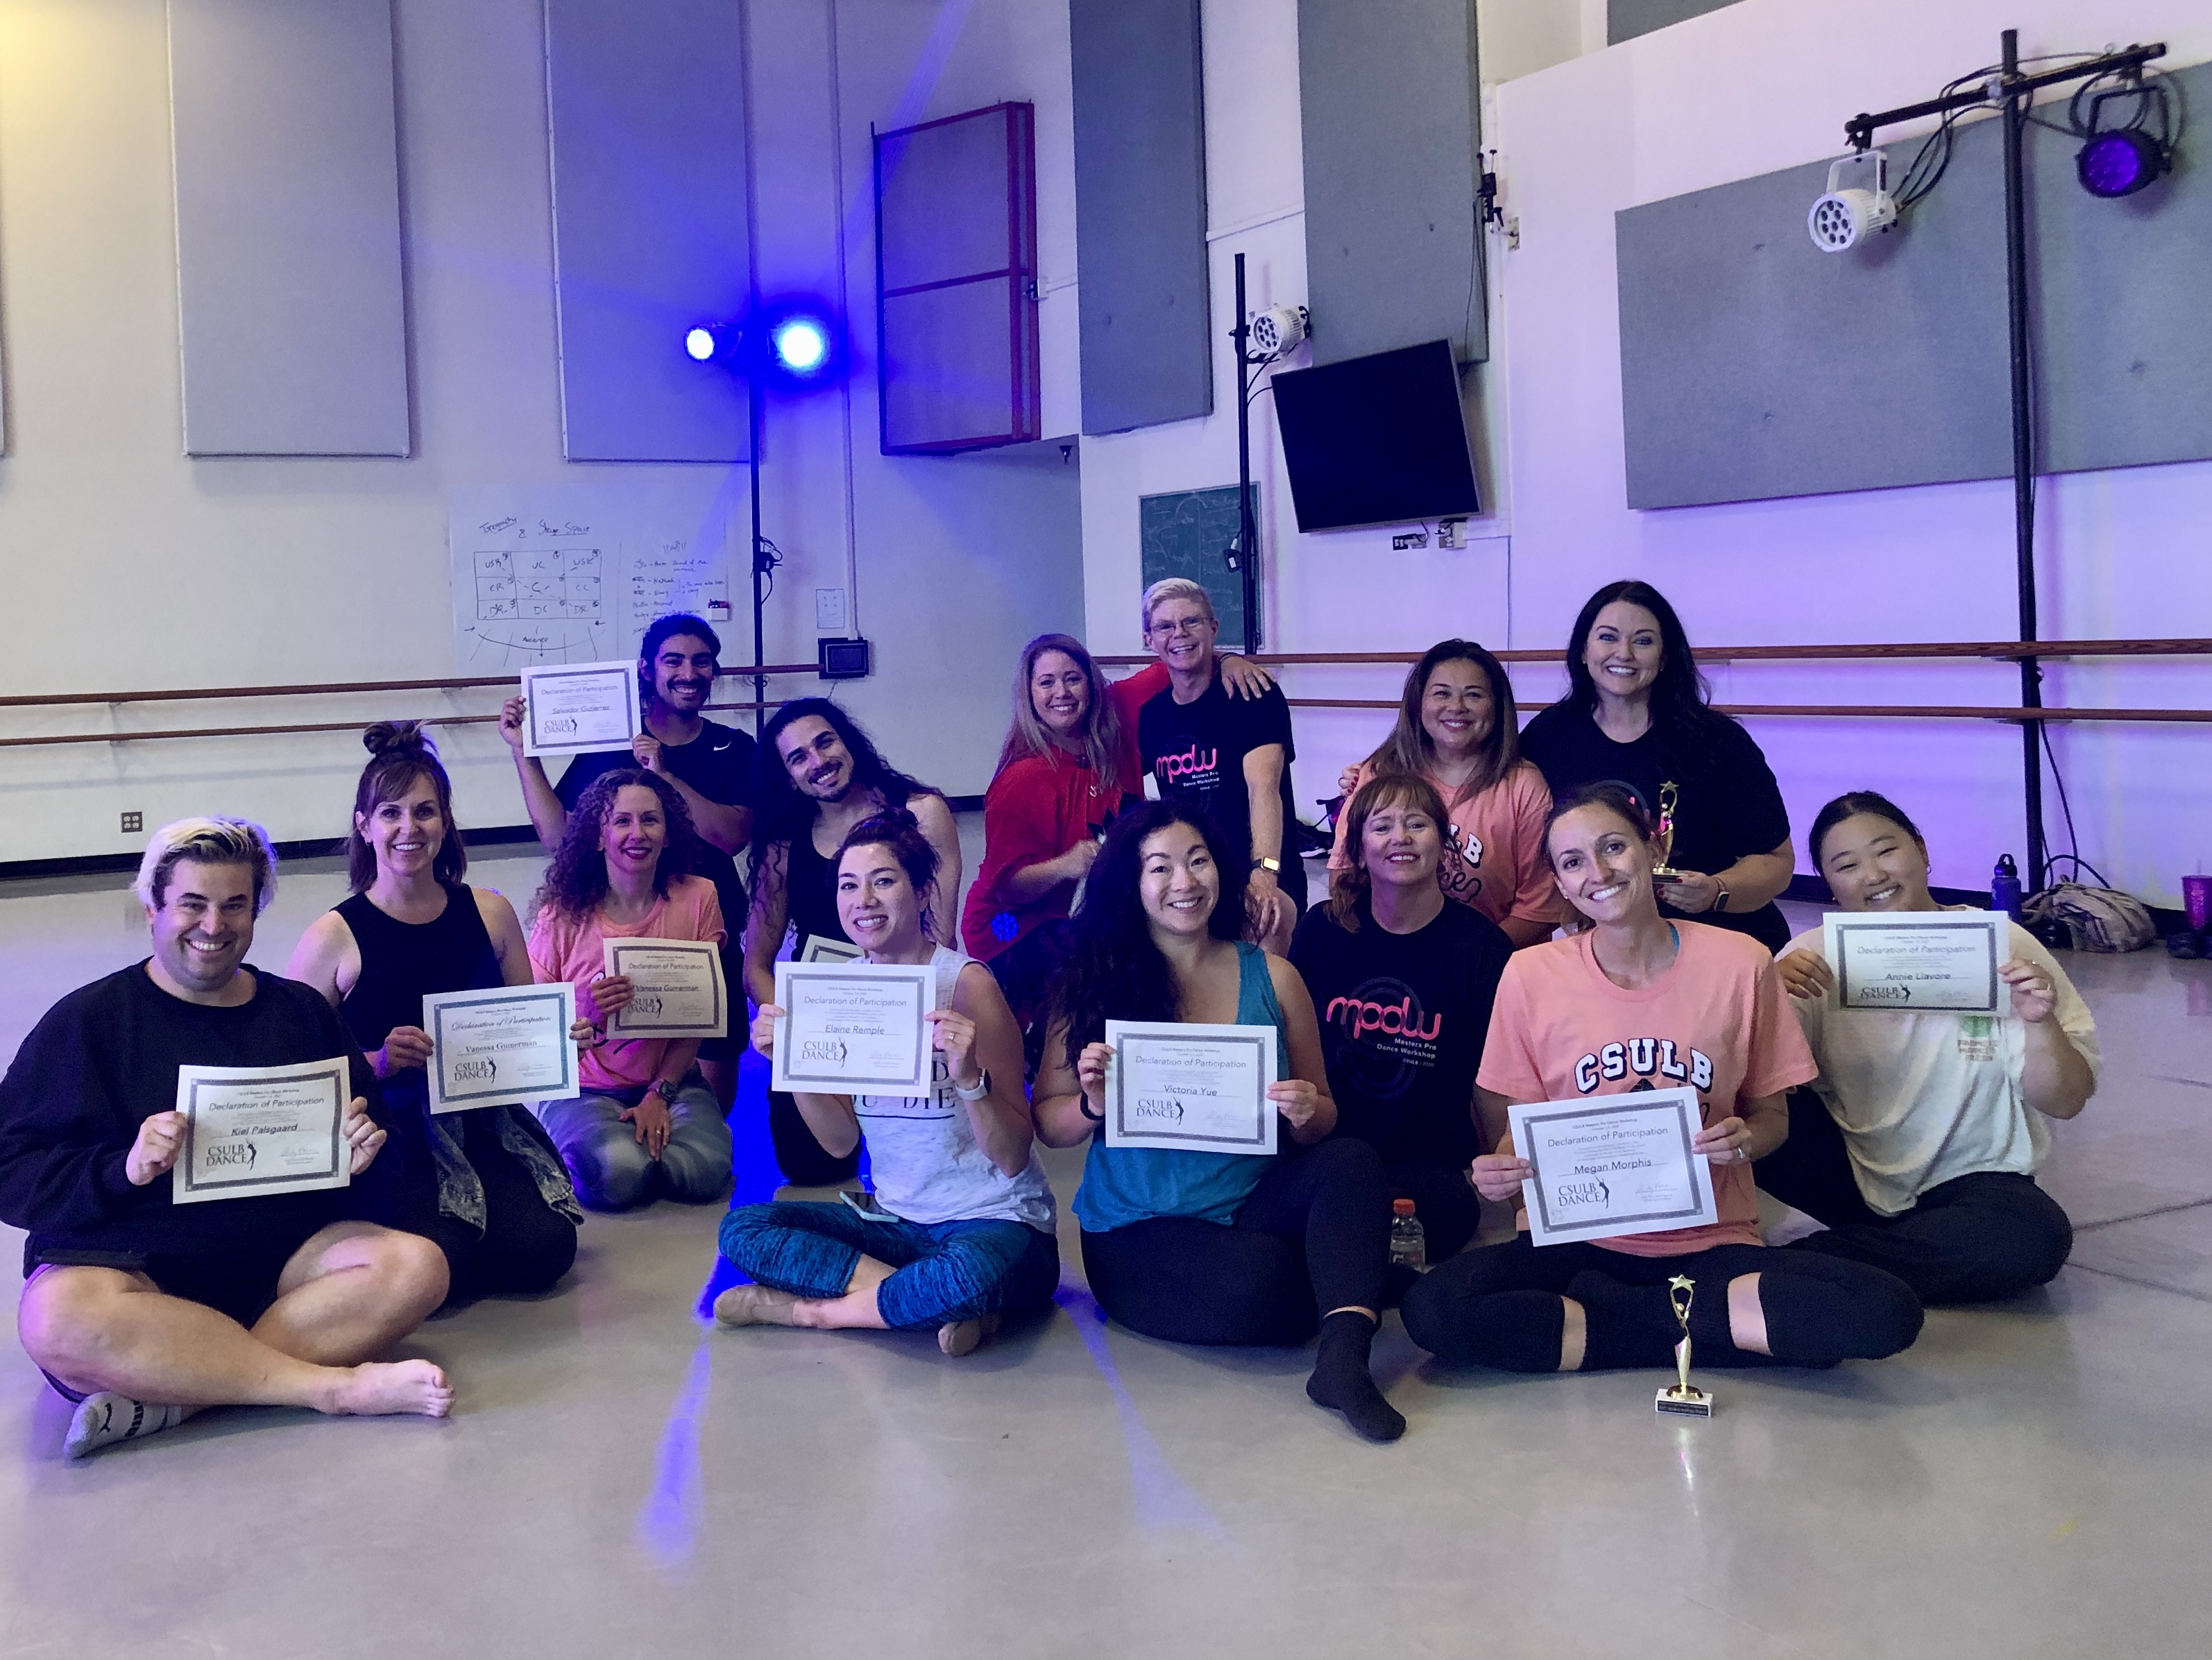 Fourteen dancers sit and display their awards.